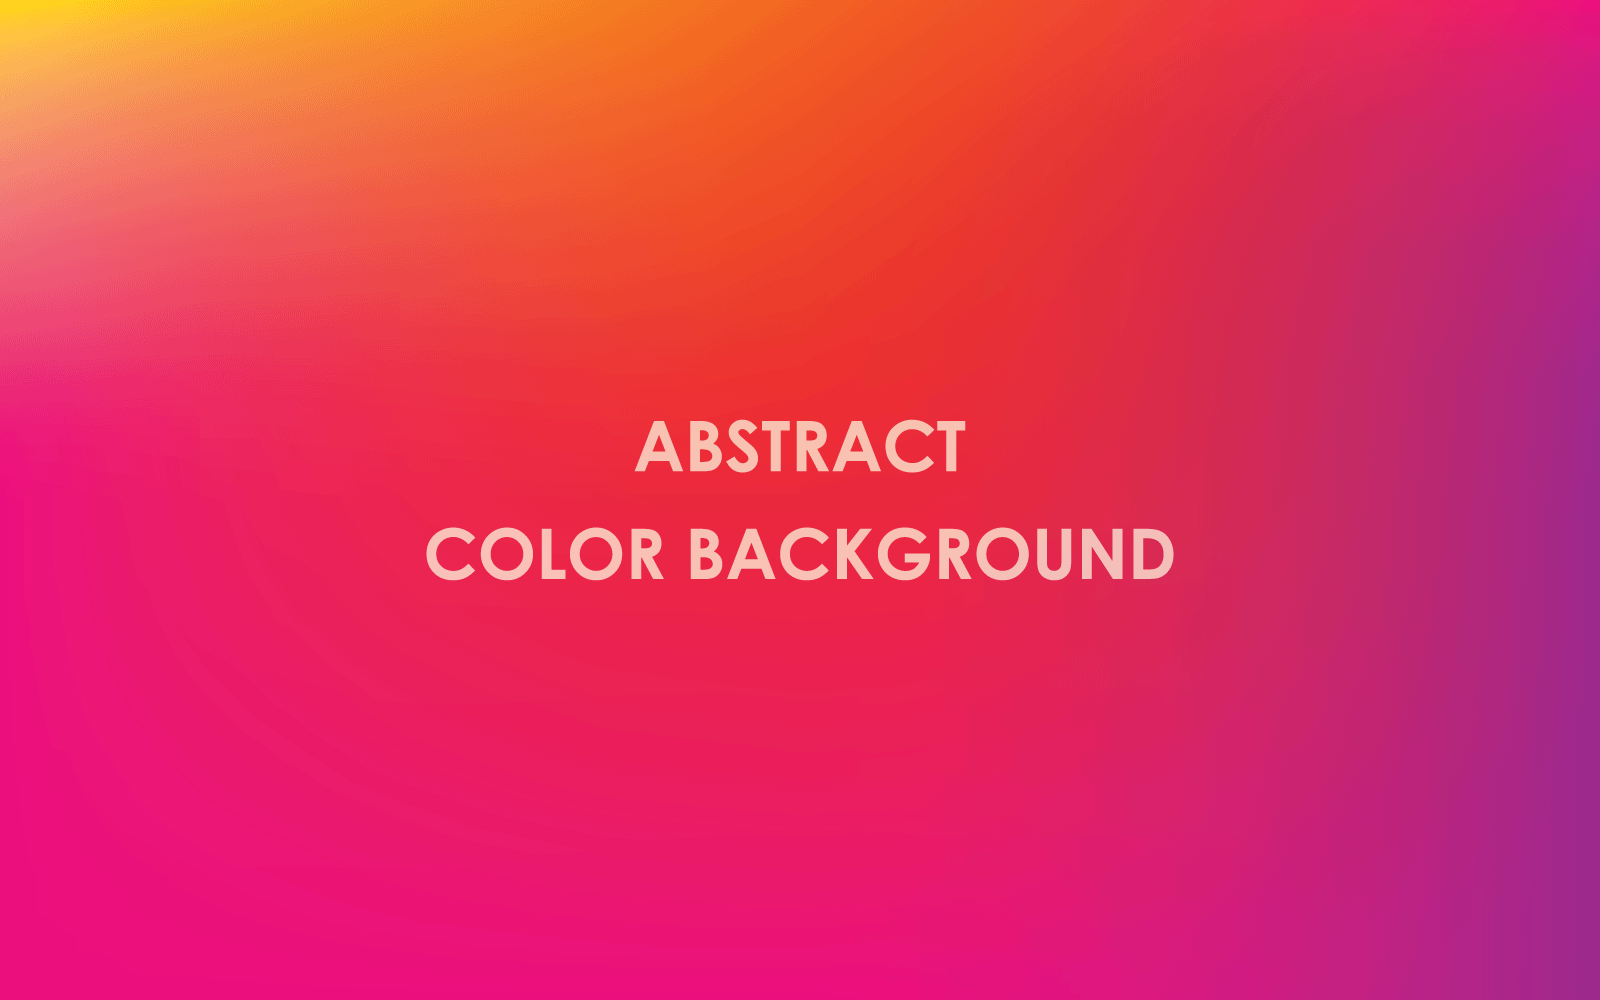 Abstract blurred gradient mesh background flat design